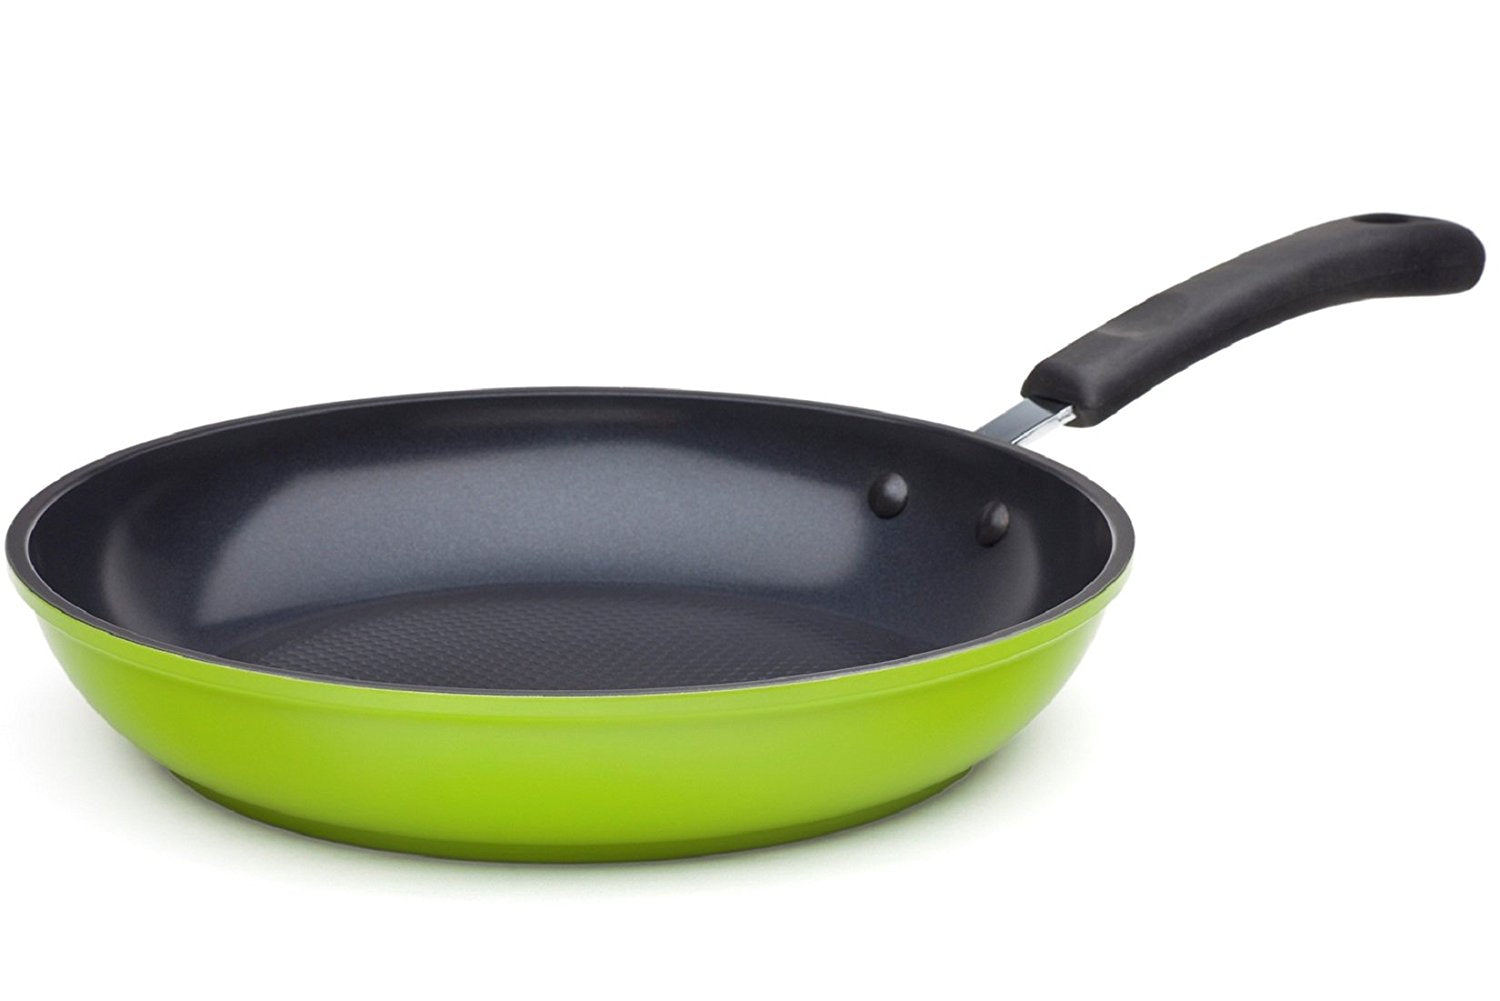 The 26 cm (10) Green Earth Frying Pan by Ozeri, with Textured